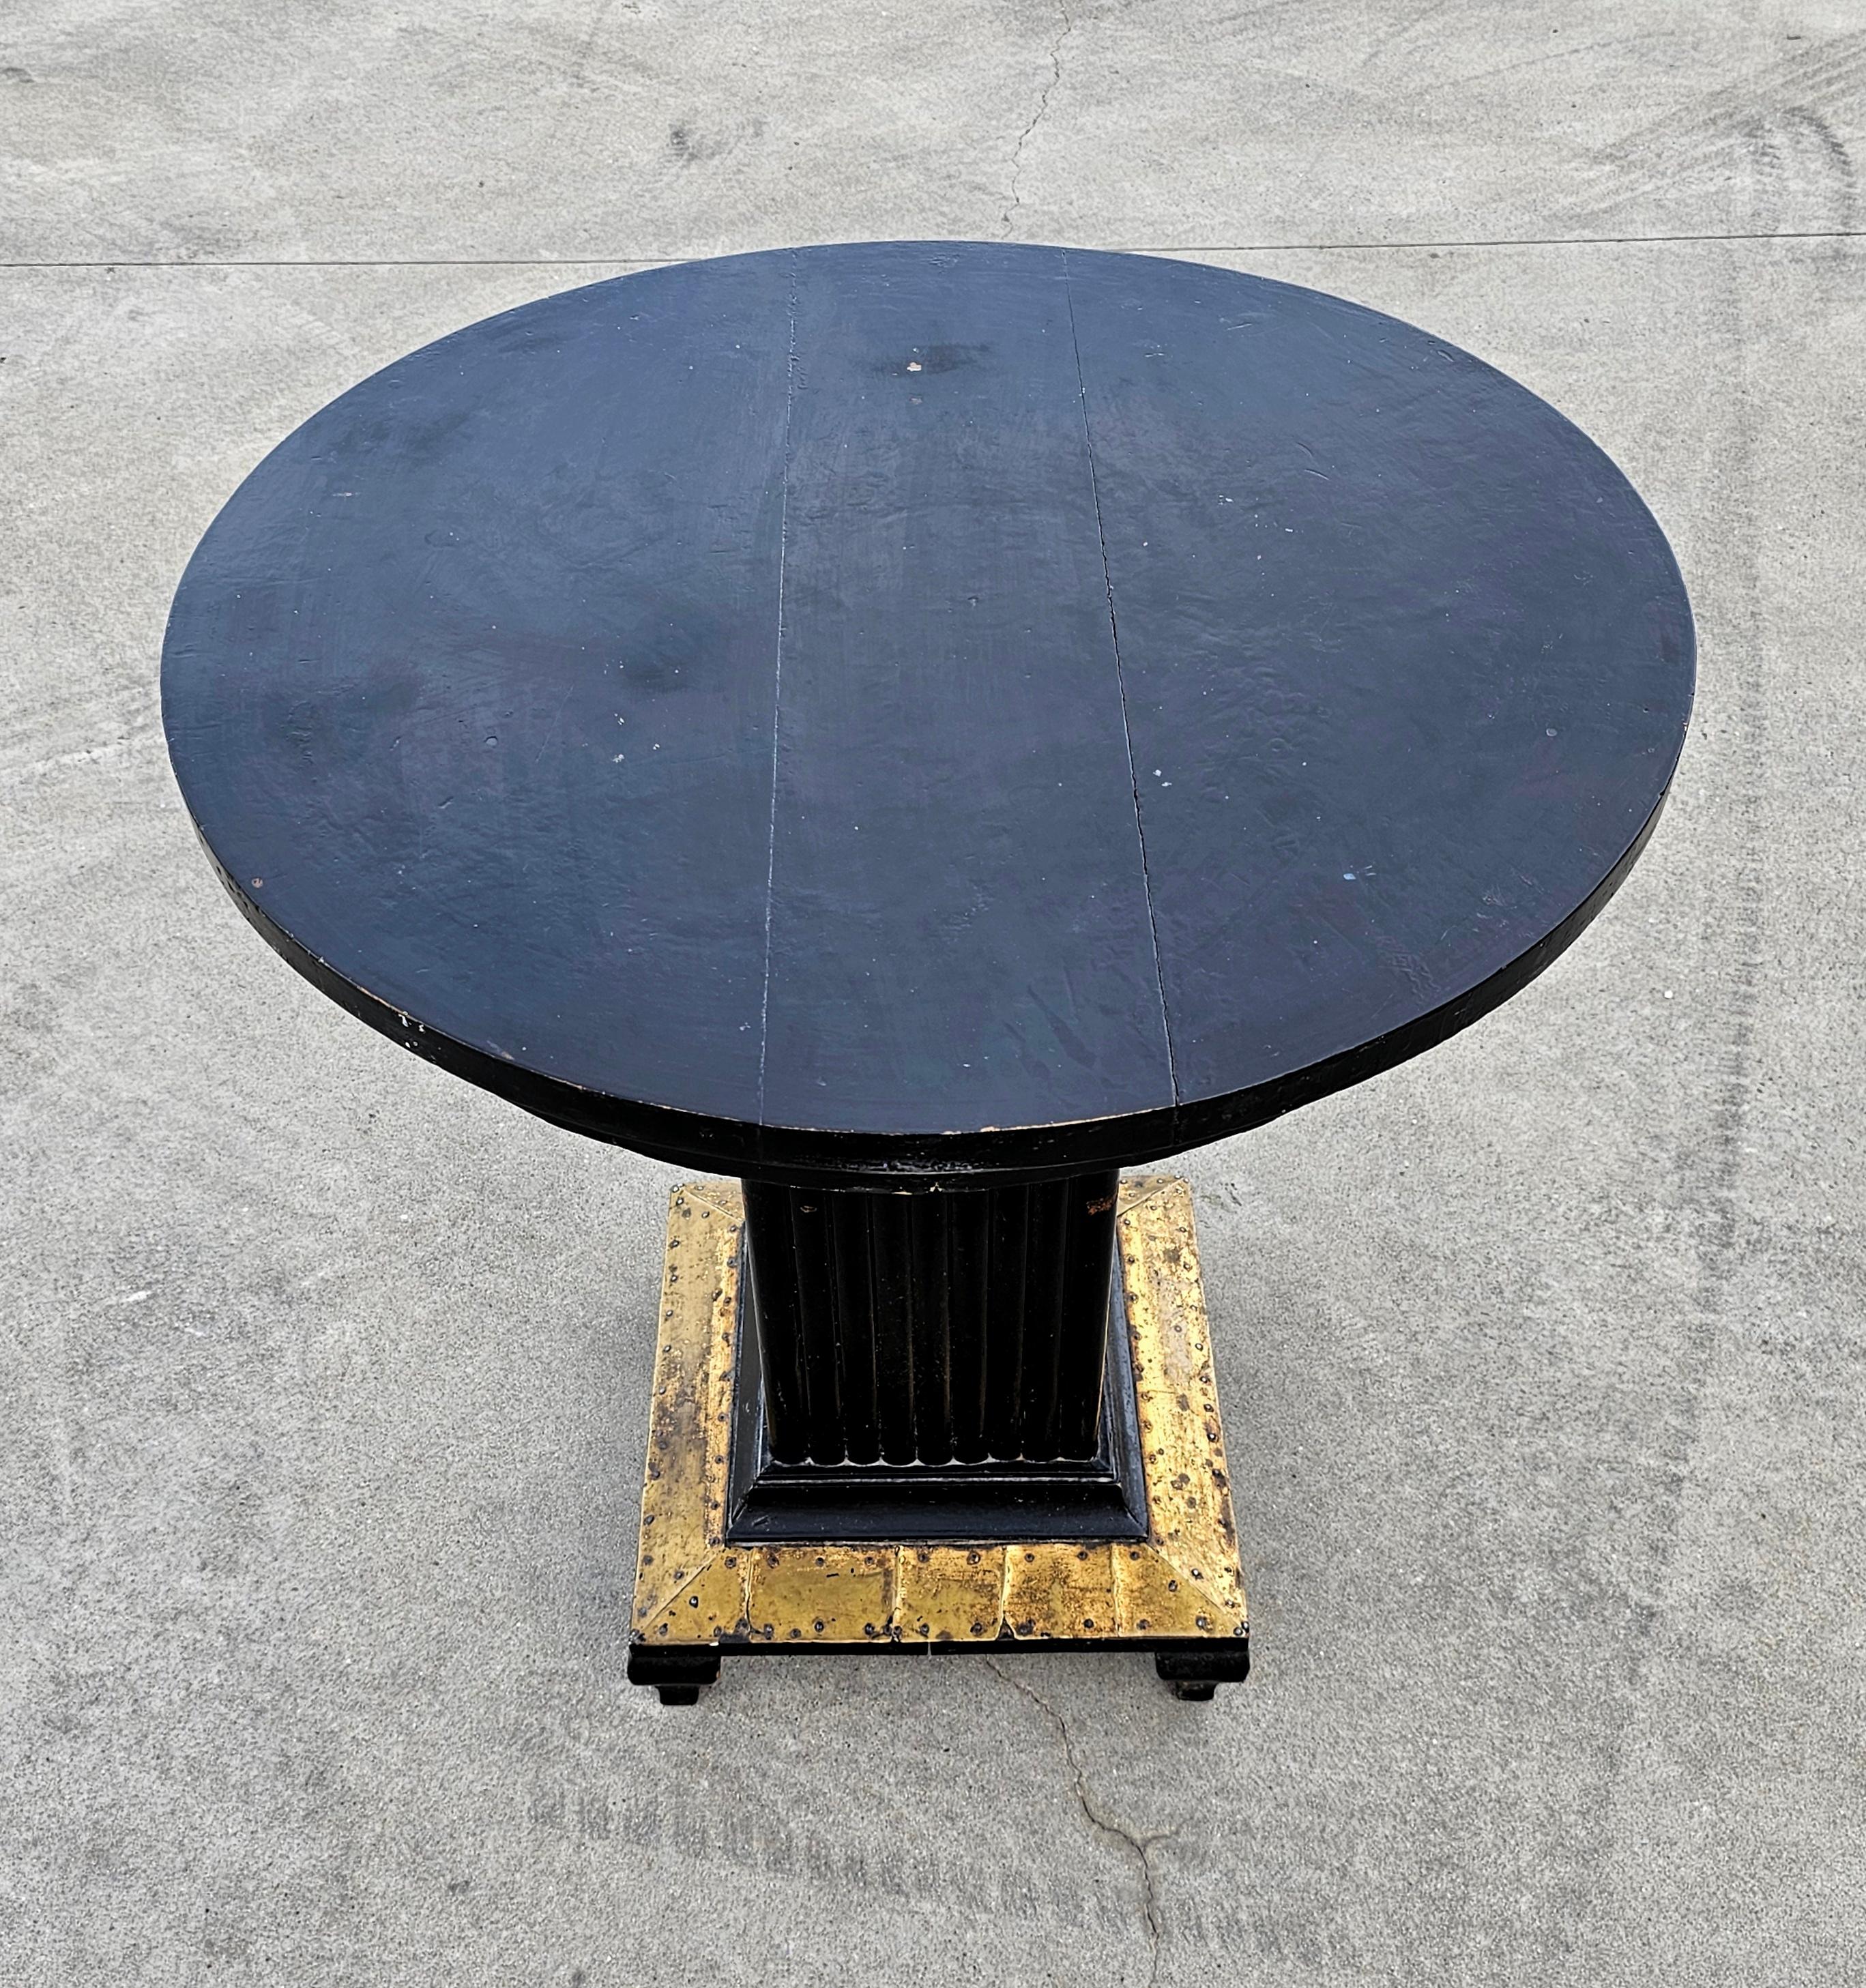 In this listing you will find an Black Antique Art Nouveau Gueridon table, with decorative elements done in brass. It is made in style of renowned cabinet maker Koloman Moser. Table is the standard height for a dining table, so it could be used for